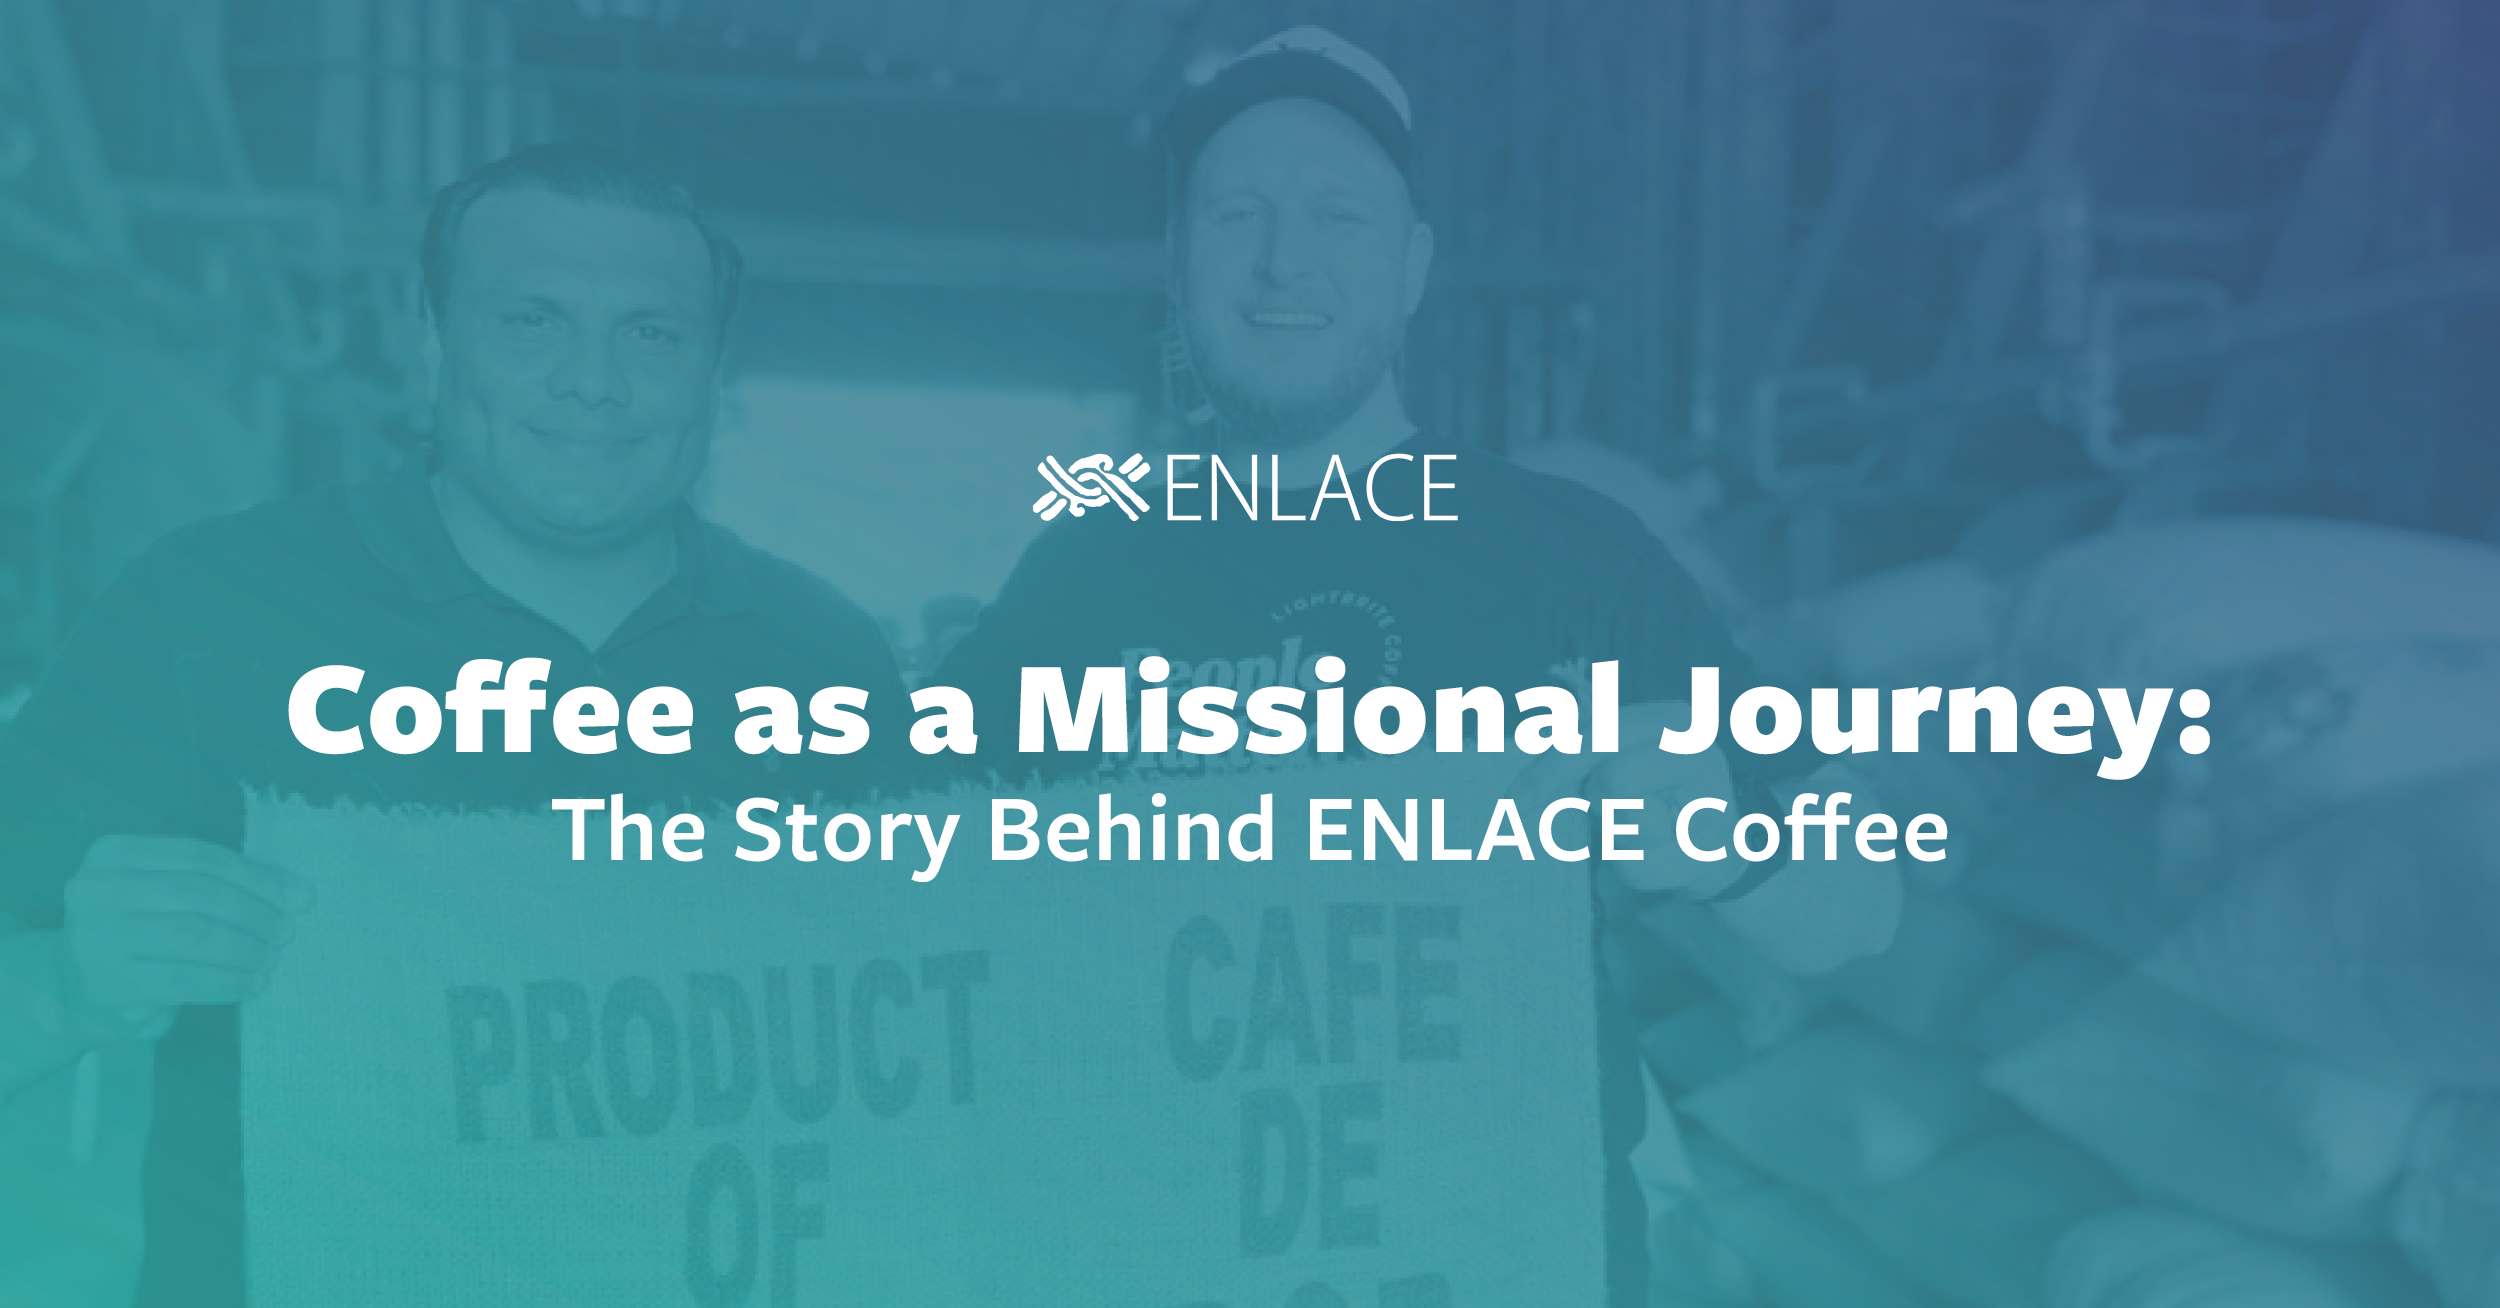 Coffee as a Missional Journey: The Story Behind ENLACE Coffee